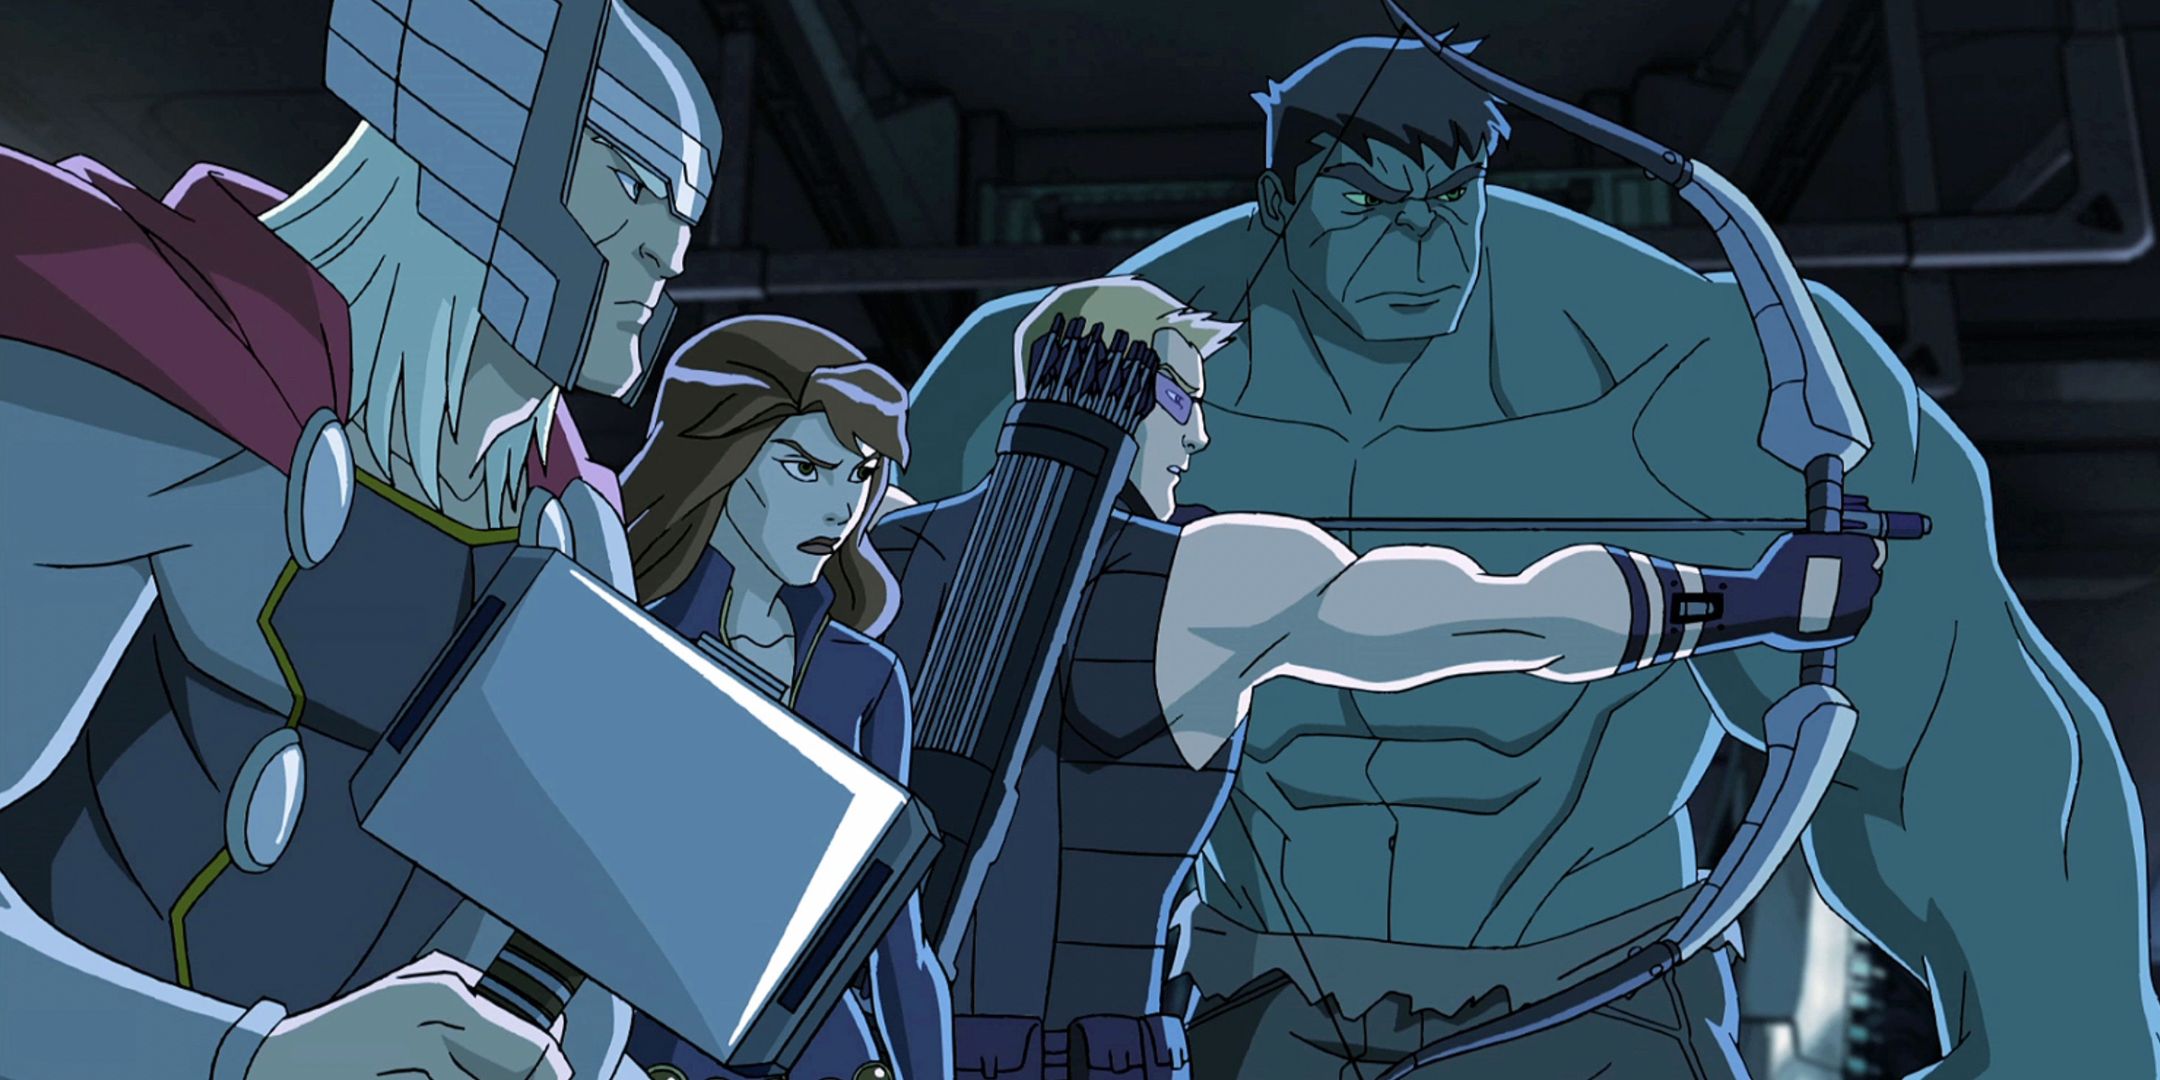 Thor, Black Widow, Hawkeye, and Hulk line up for a fight in the animated Avengers series